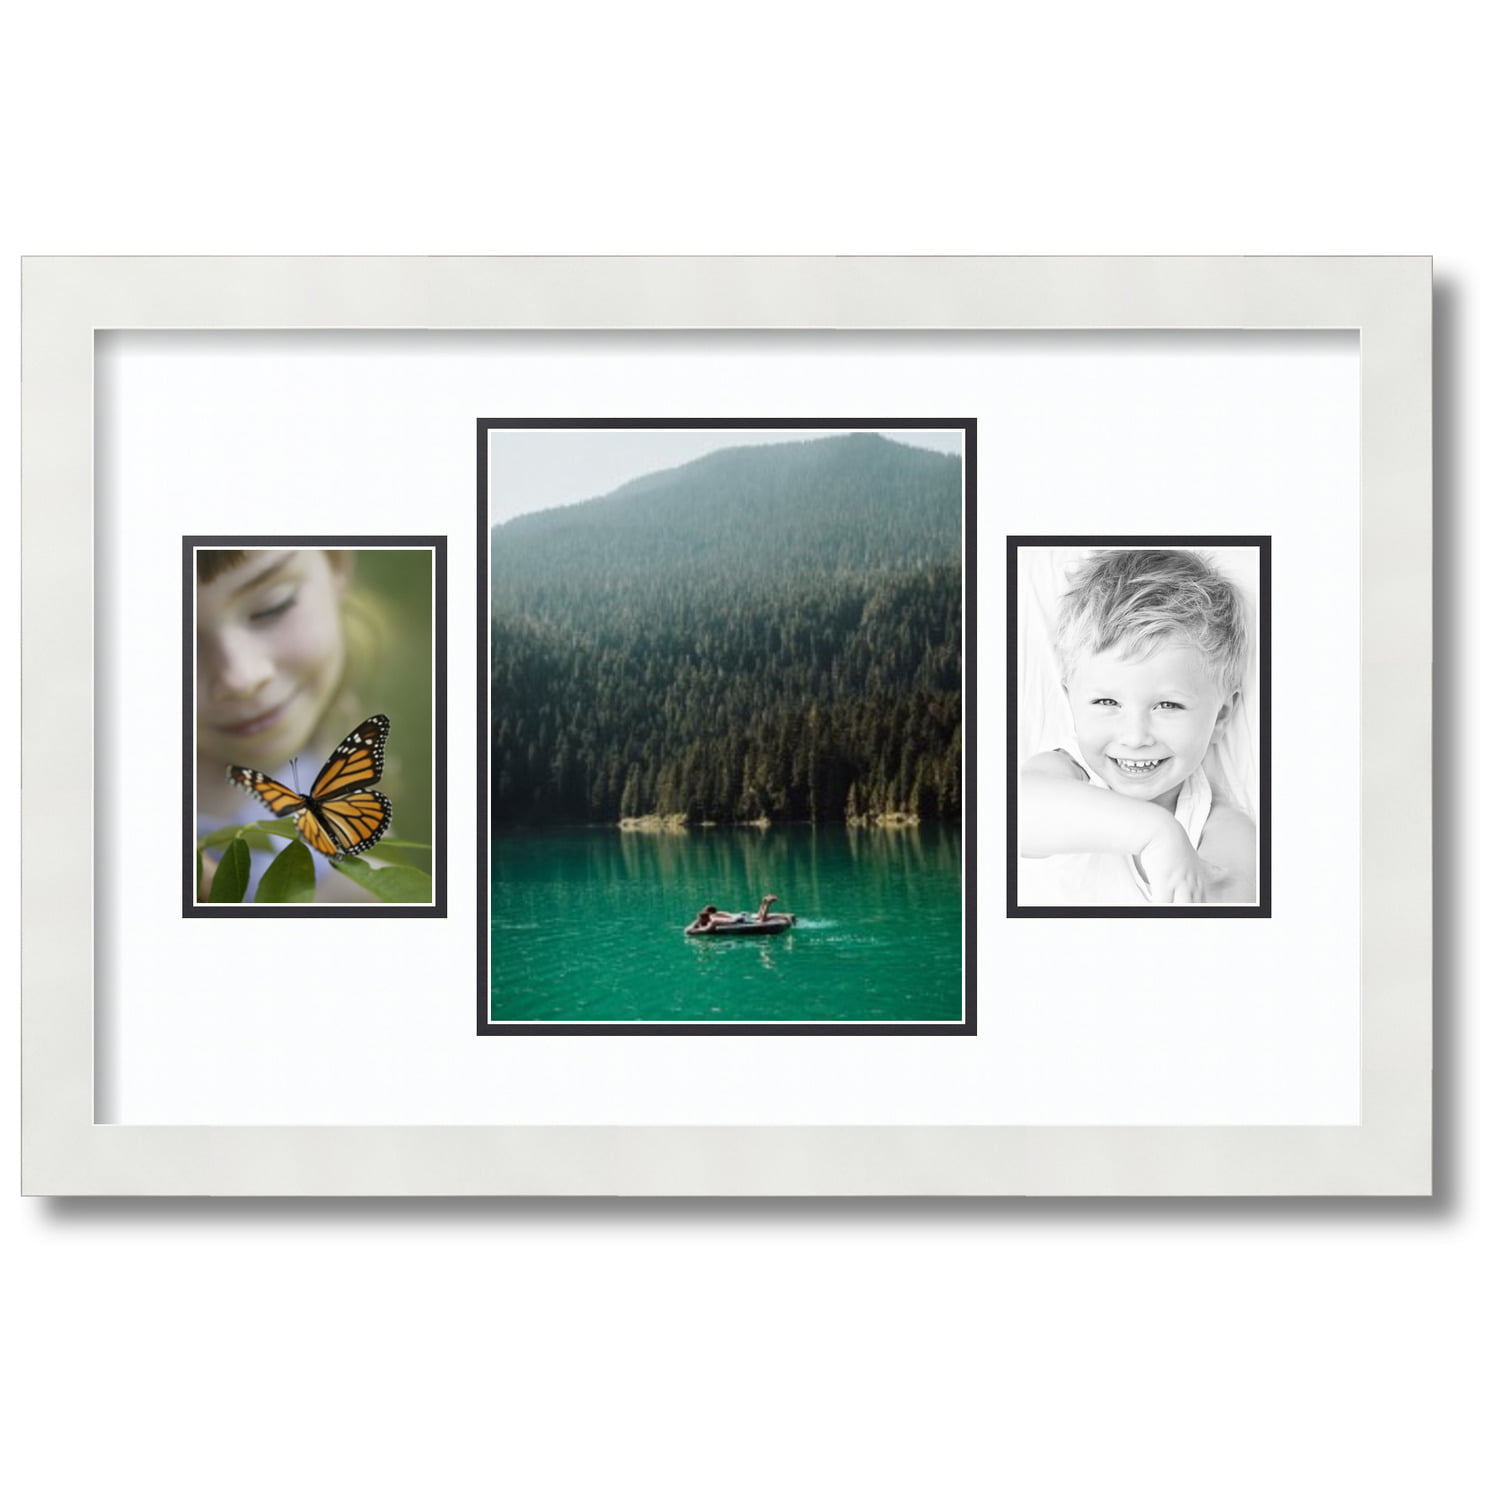 4x6 Opening ArtToFrames Matted 8x10 White Picture Frame with 2" Double Mat 